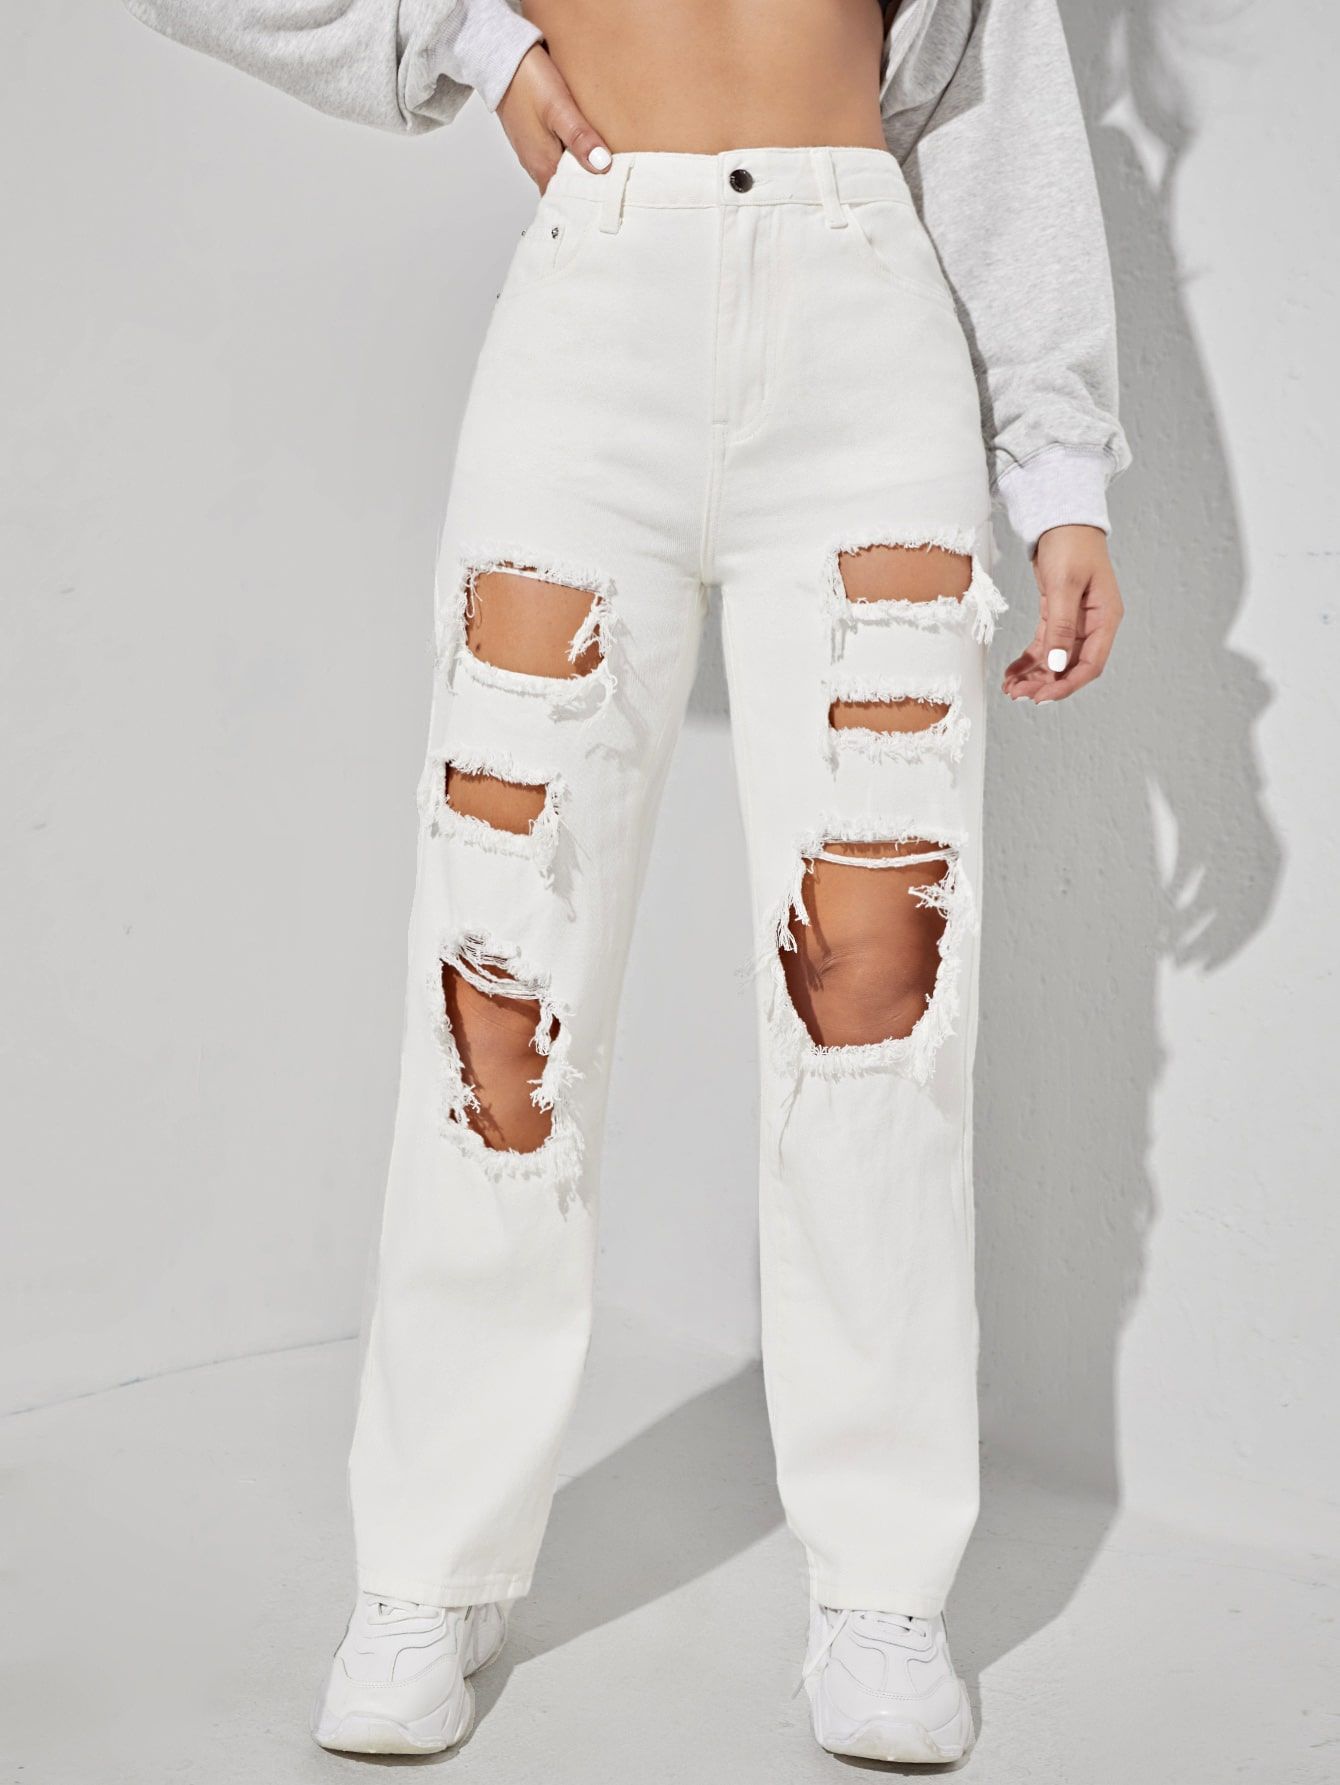 Why Every Fashionista Needs a Pair of
White Ripped Jeans